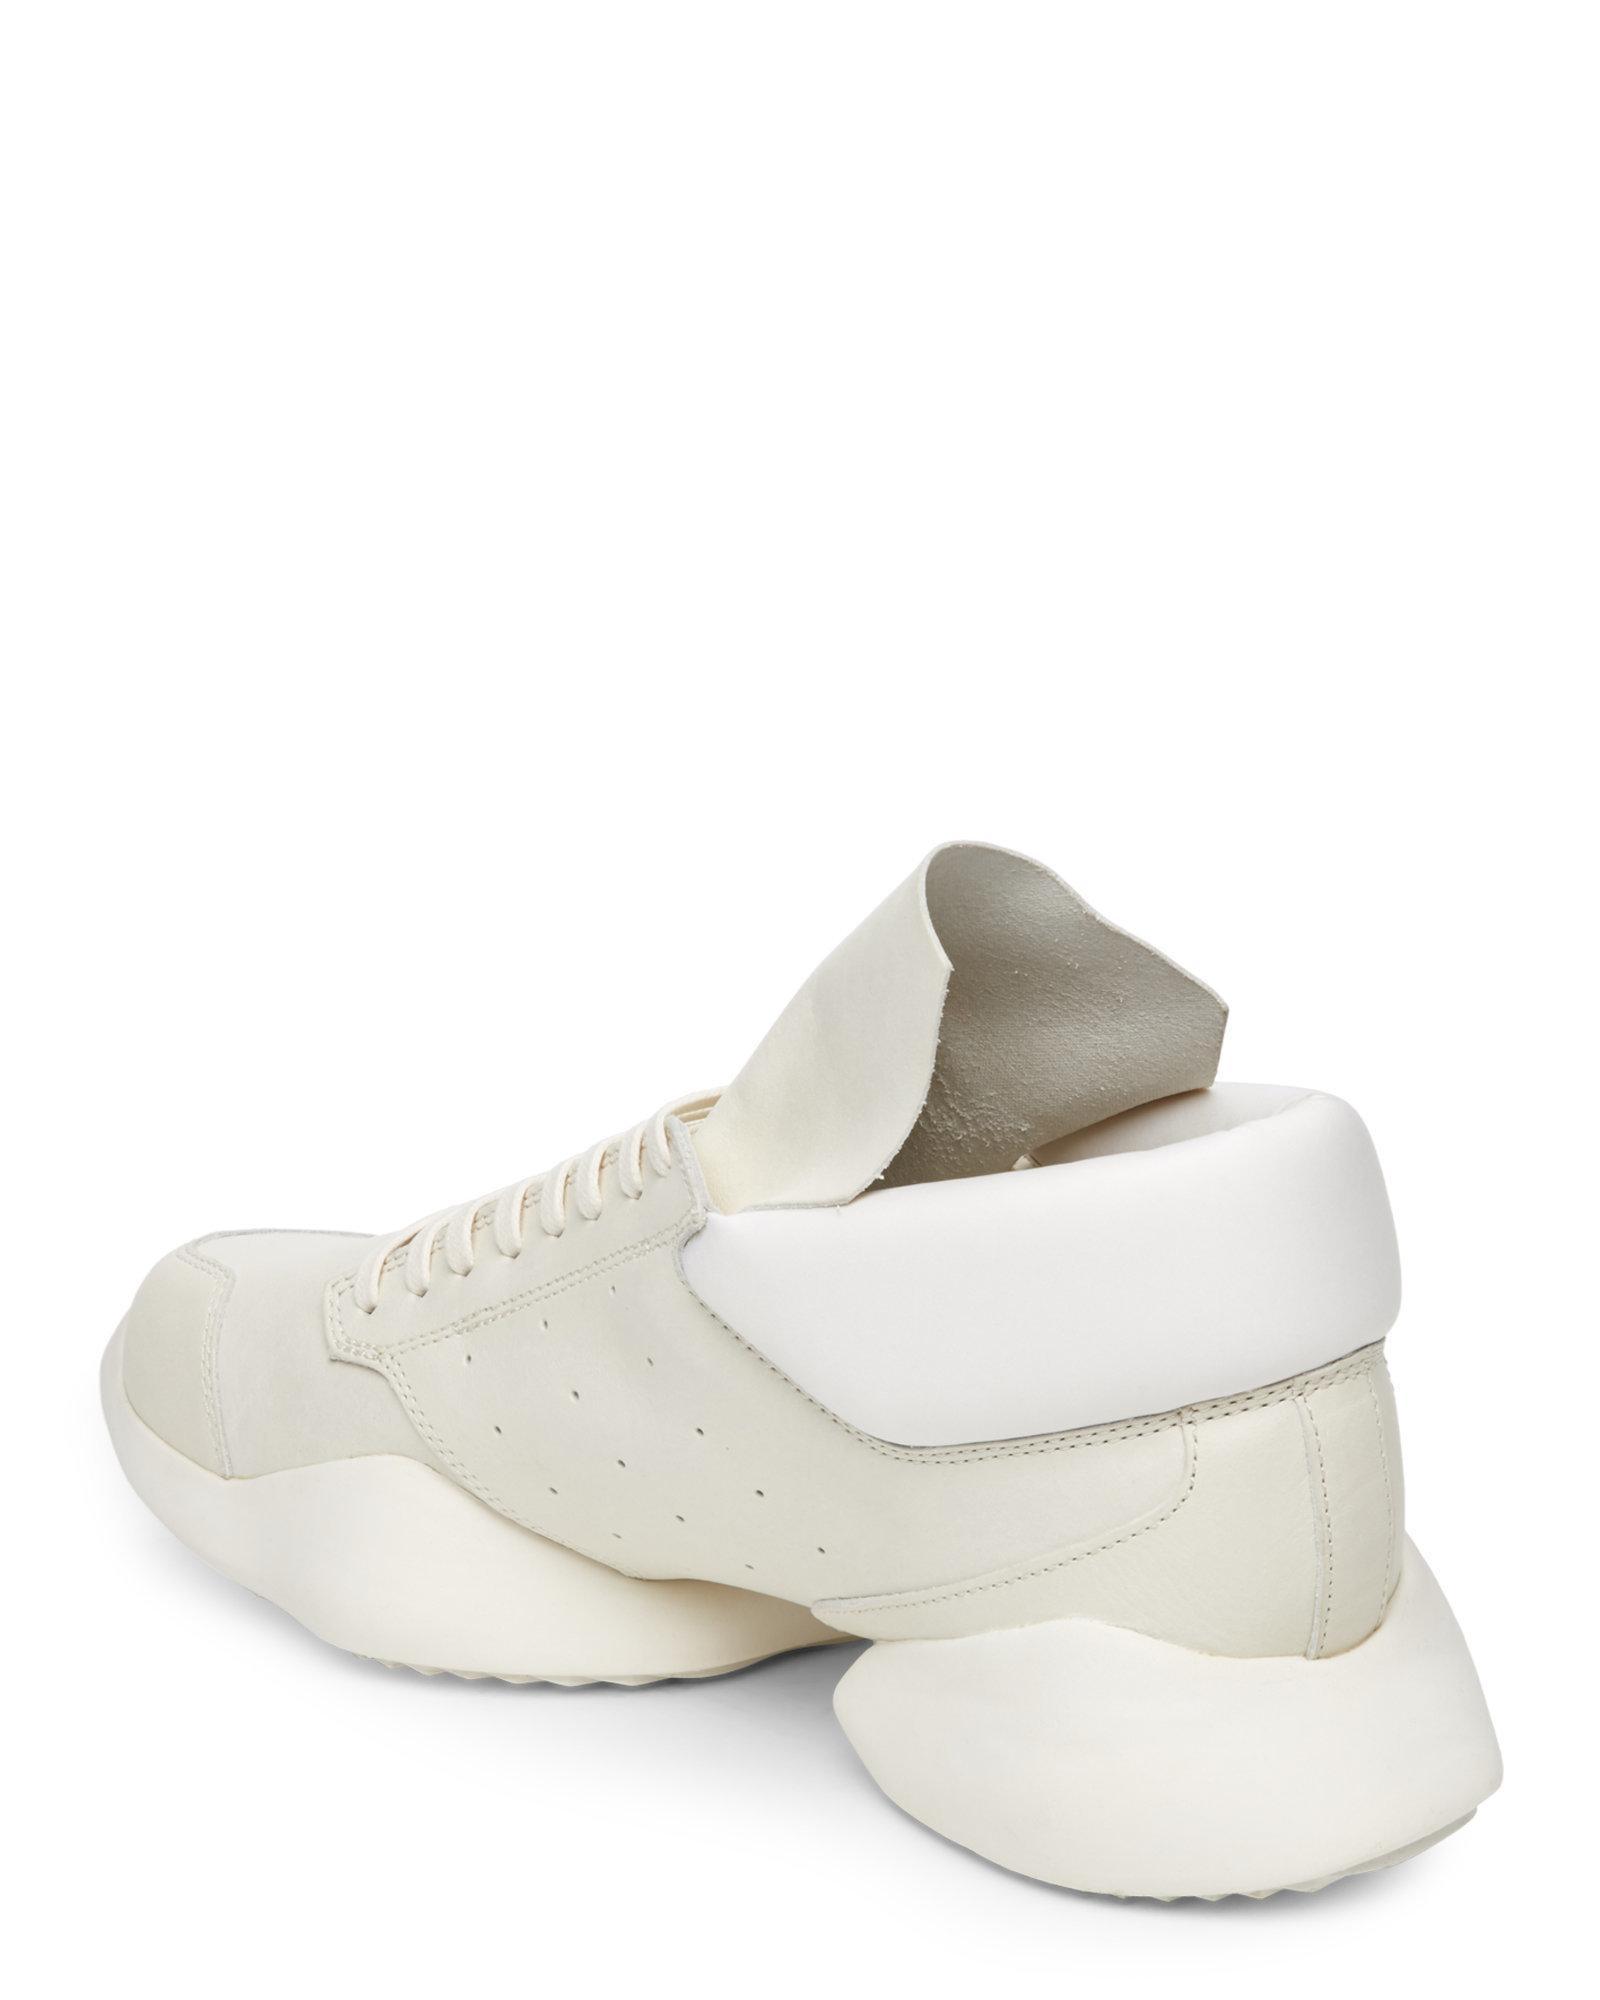 Rick owens Low-Top Leather Sneakers in White for Men | Lyst